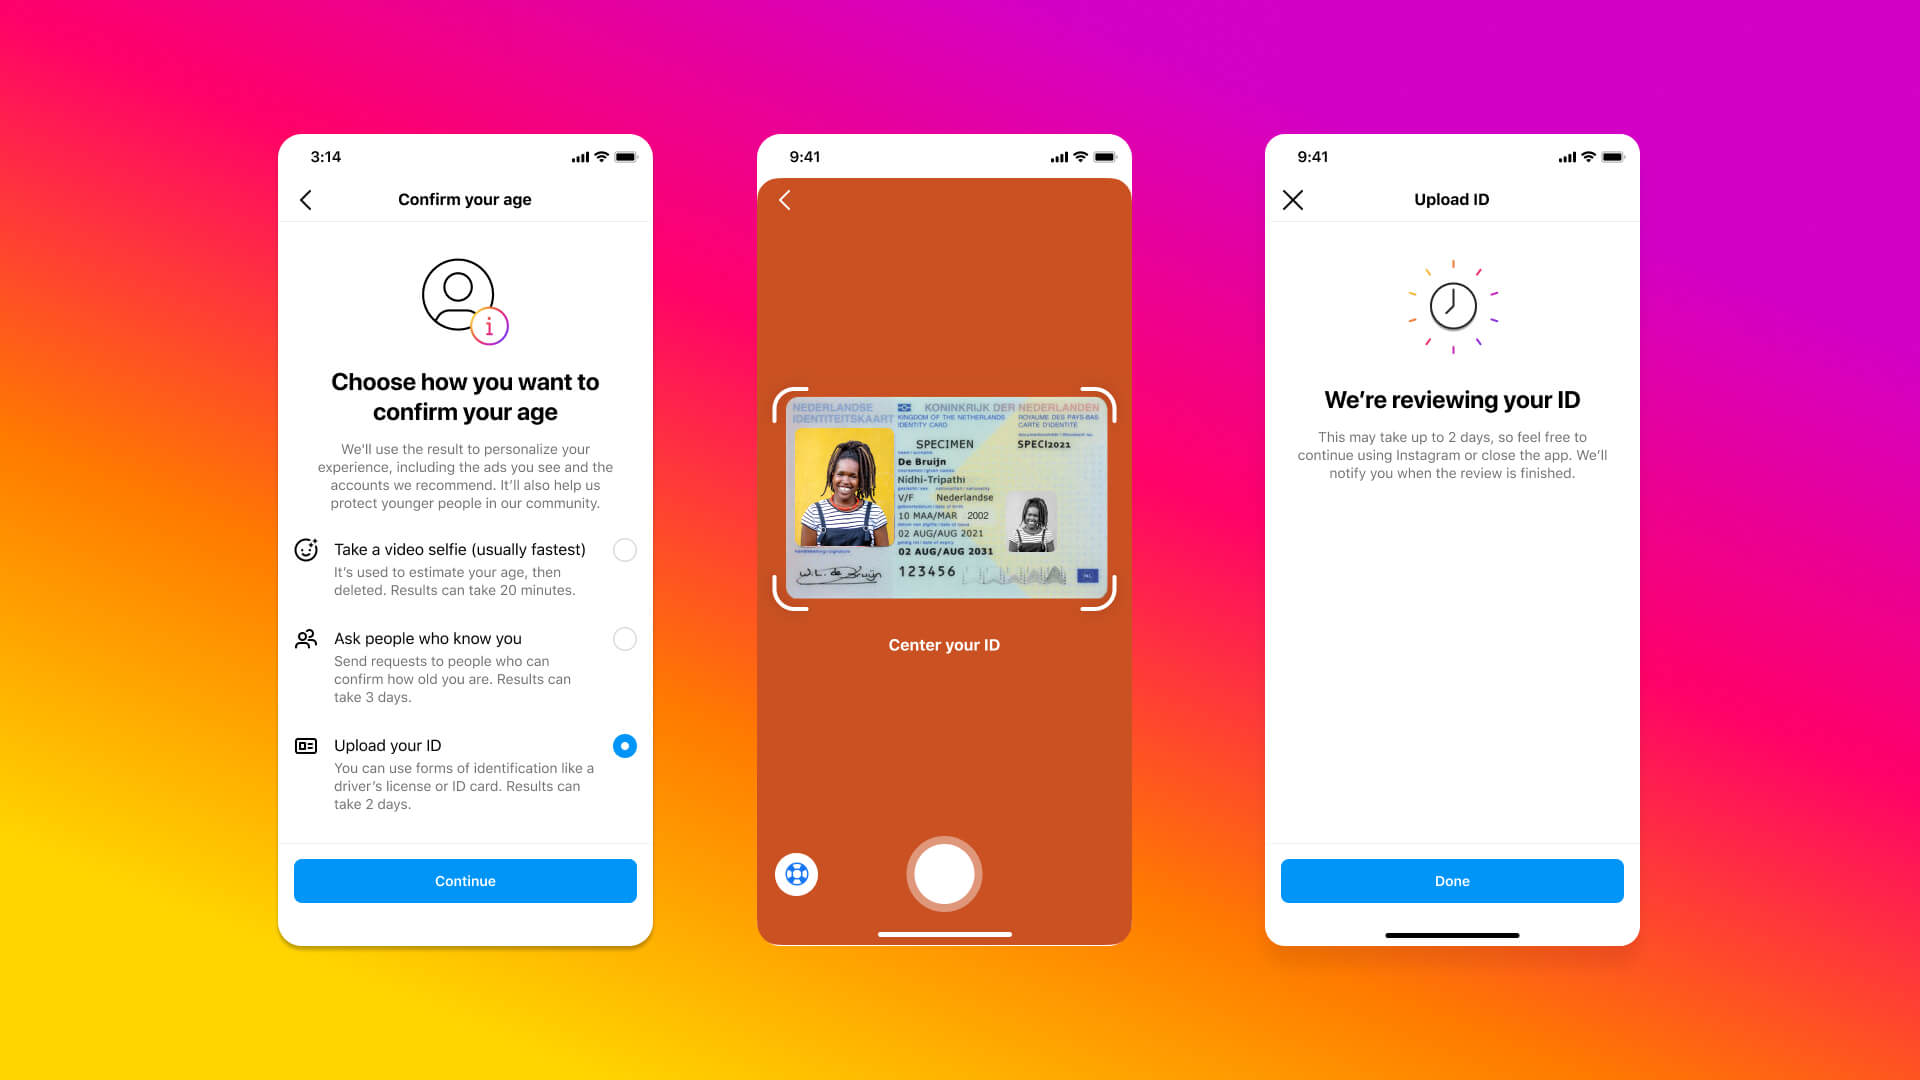 Instagram tests new age verification tools for 18 and over accounts, including video selfies - TechCrunch (Picture 1)